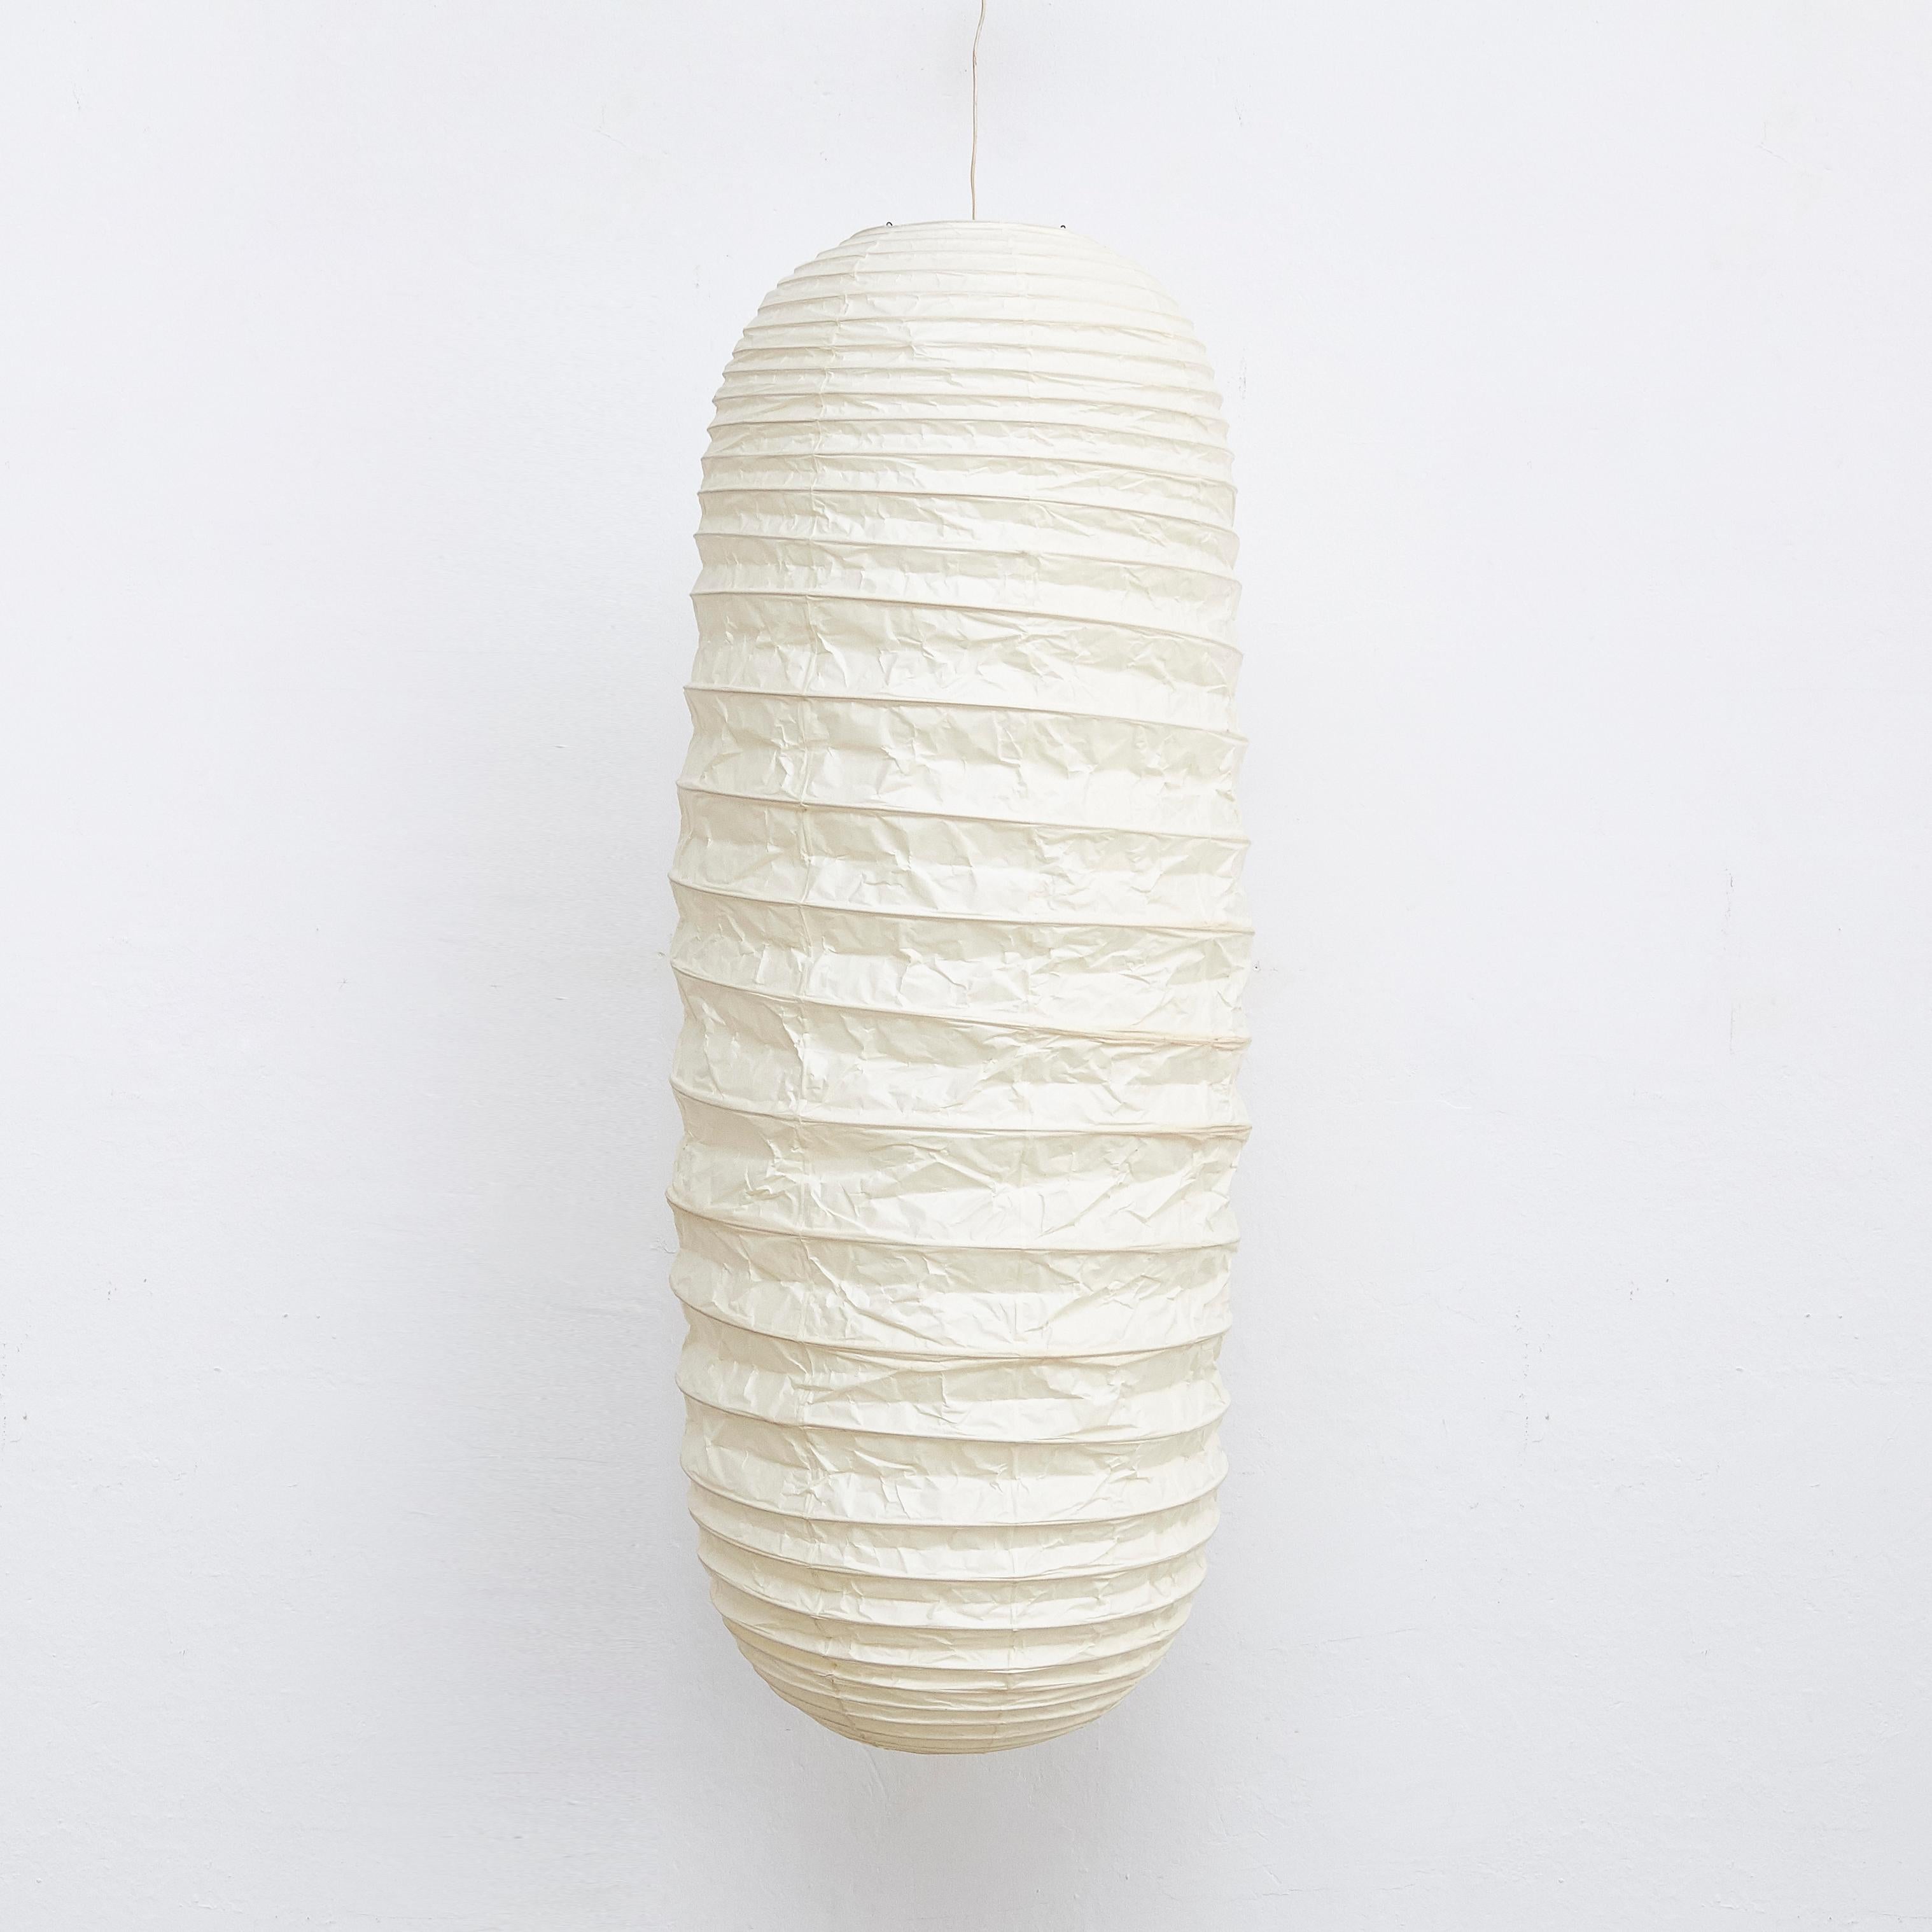 Ceiling Lamp, designed by Isamu Noguchi.
Manufactured by Ozeki & Company Ltd. (Japan.)
Bamboo ribbing structure covered by washi paper manufactured according to the traditional procedures.

In good vintage condition.

Edition signed with